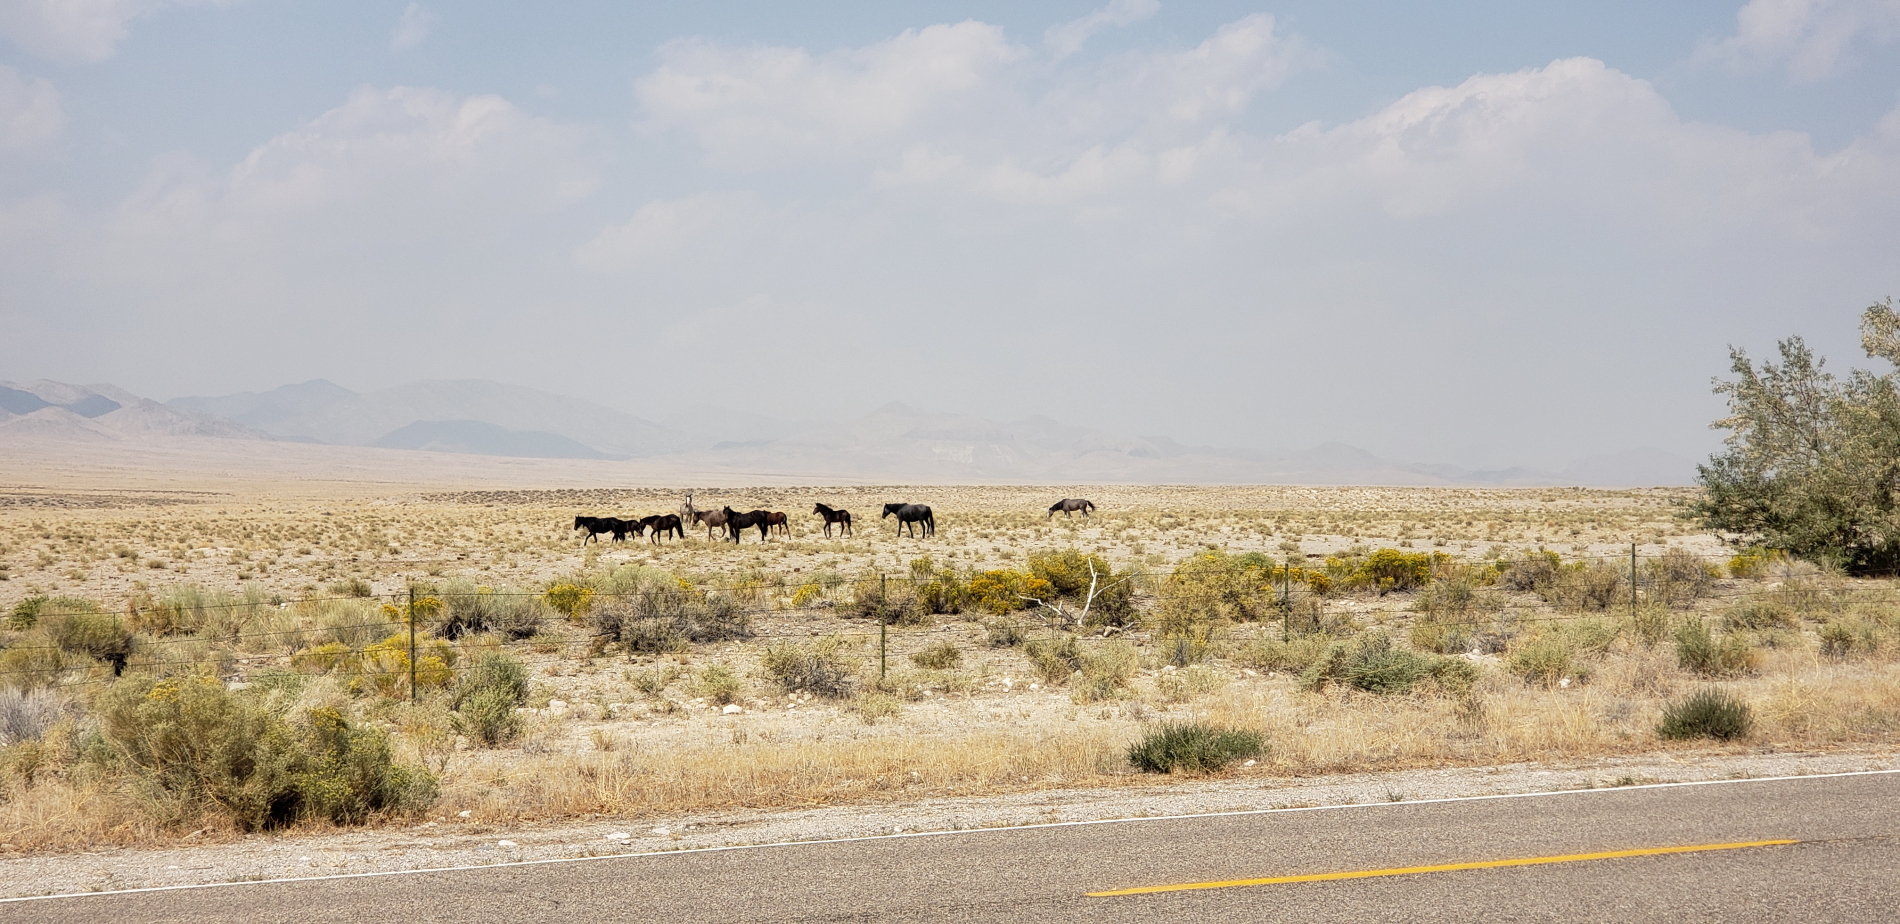 Wild horses in Nevada, at least they seemed wild to me :)